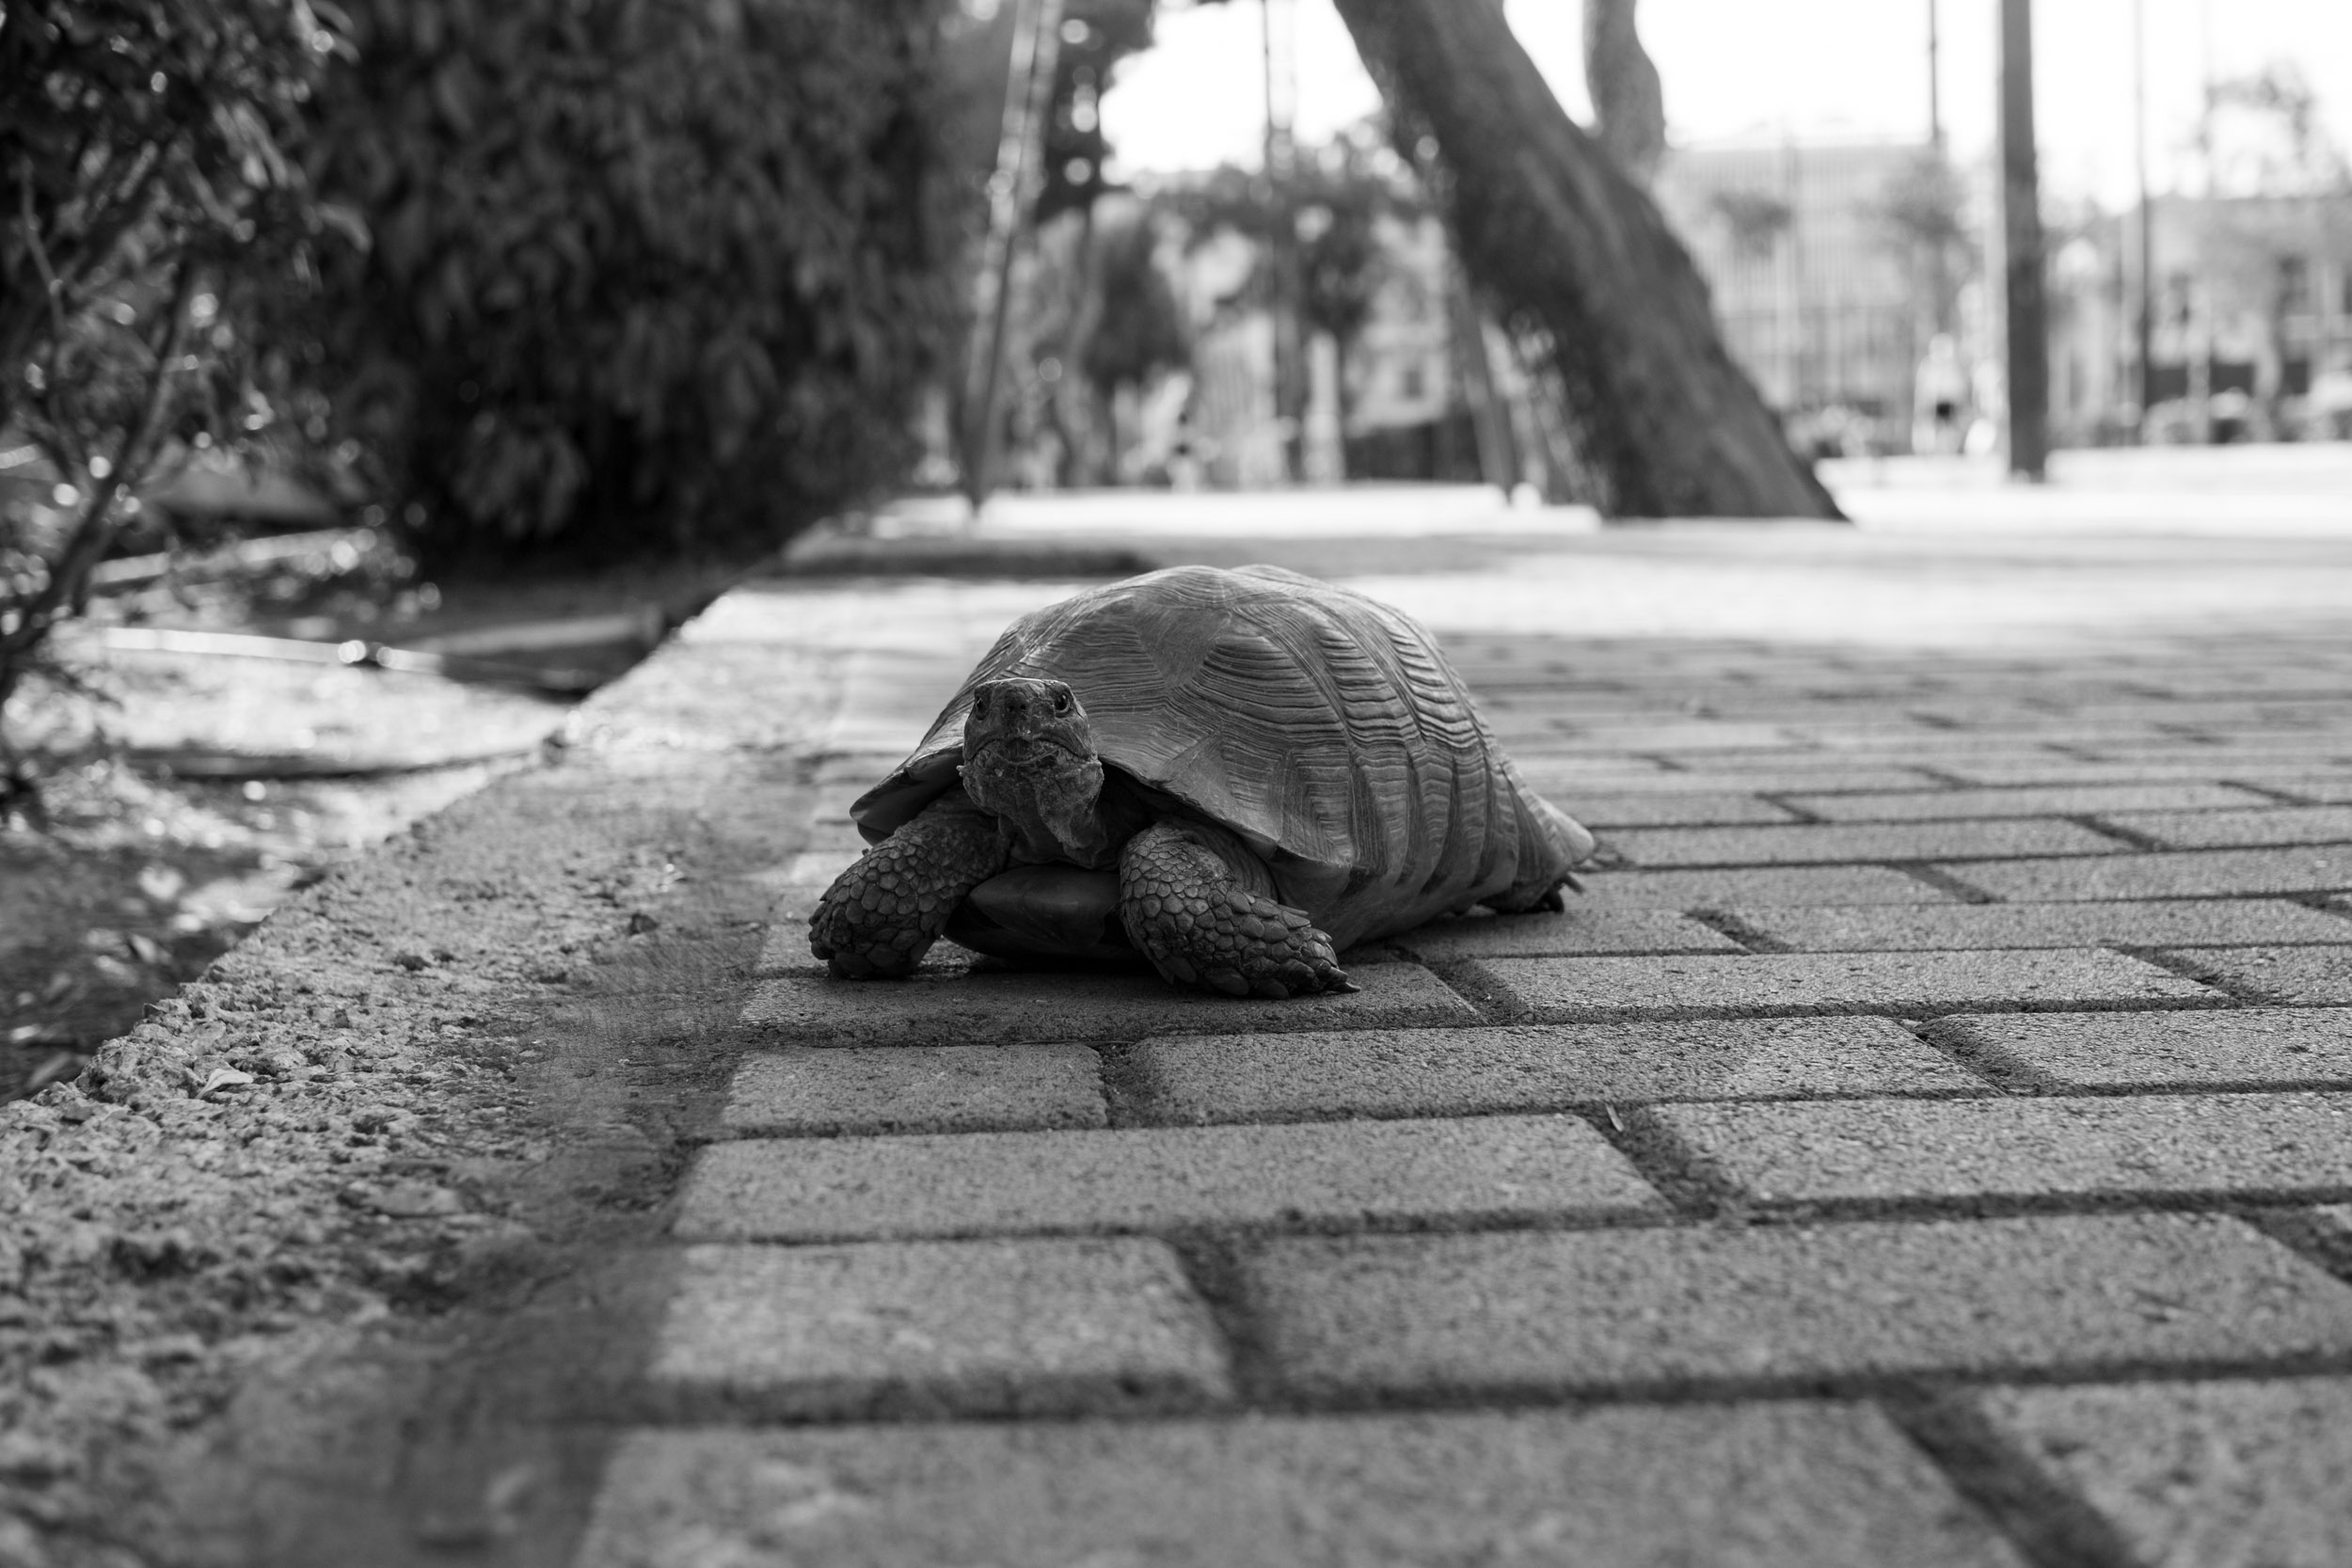 A tortoise we met on the side of a busy road in Athens.